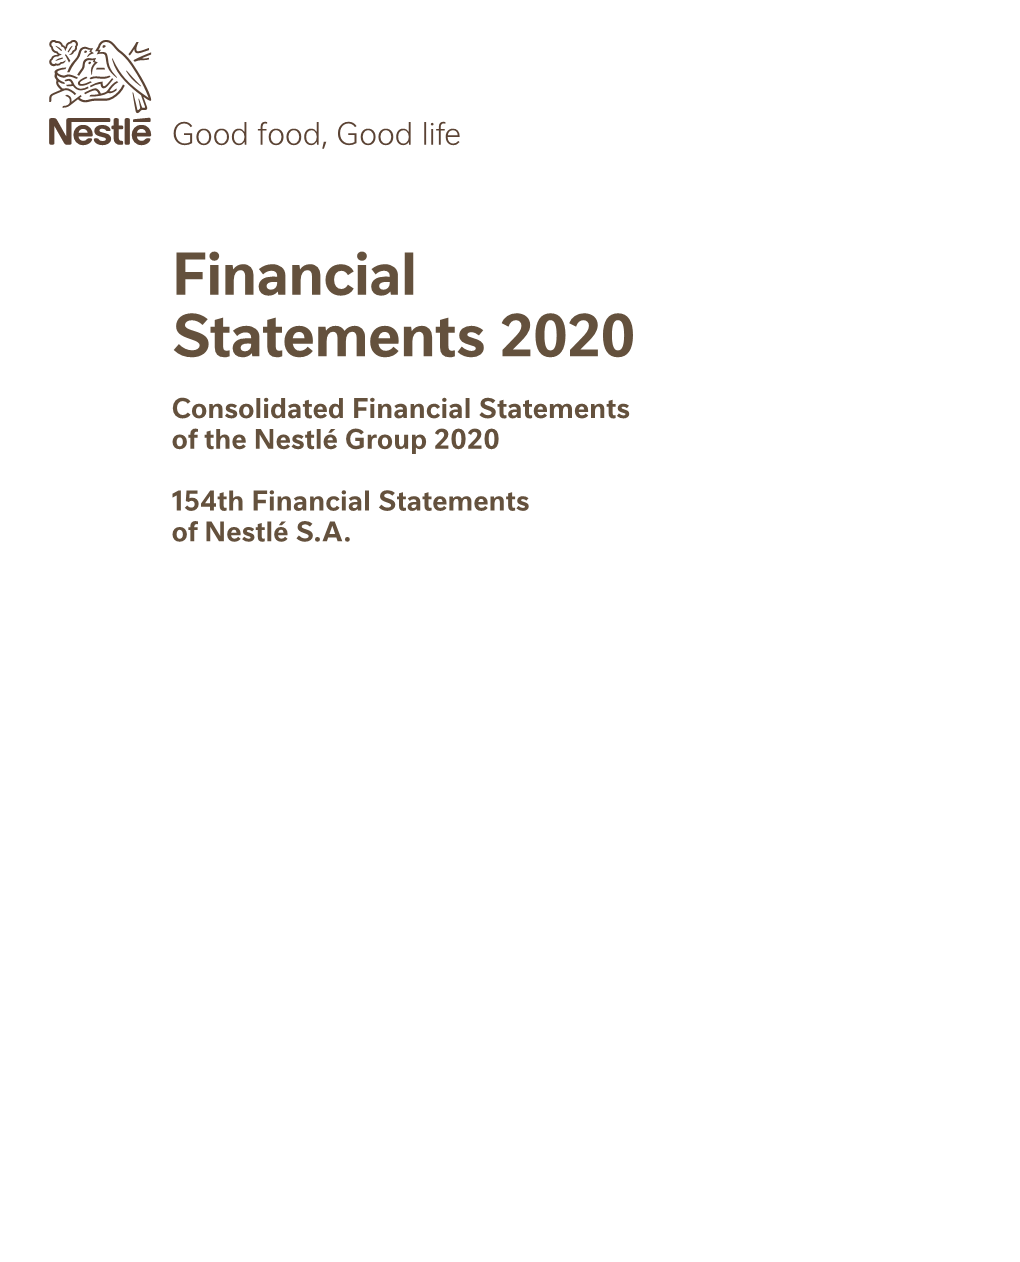 Consolidated Financial Statements of the Nestlé Group 2020